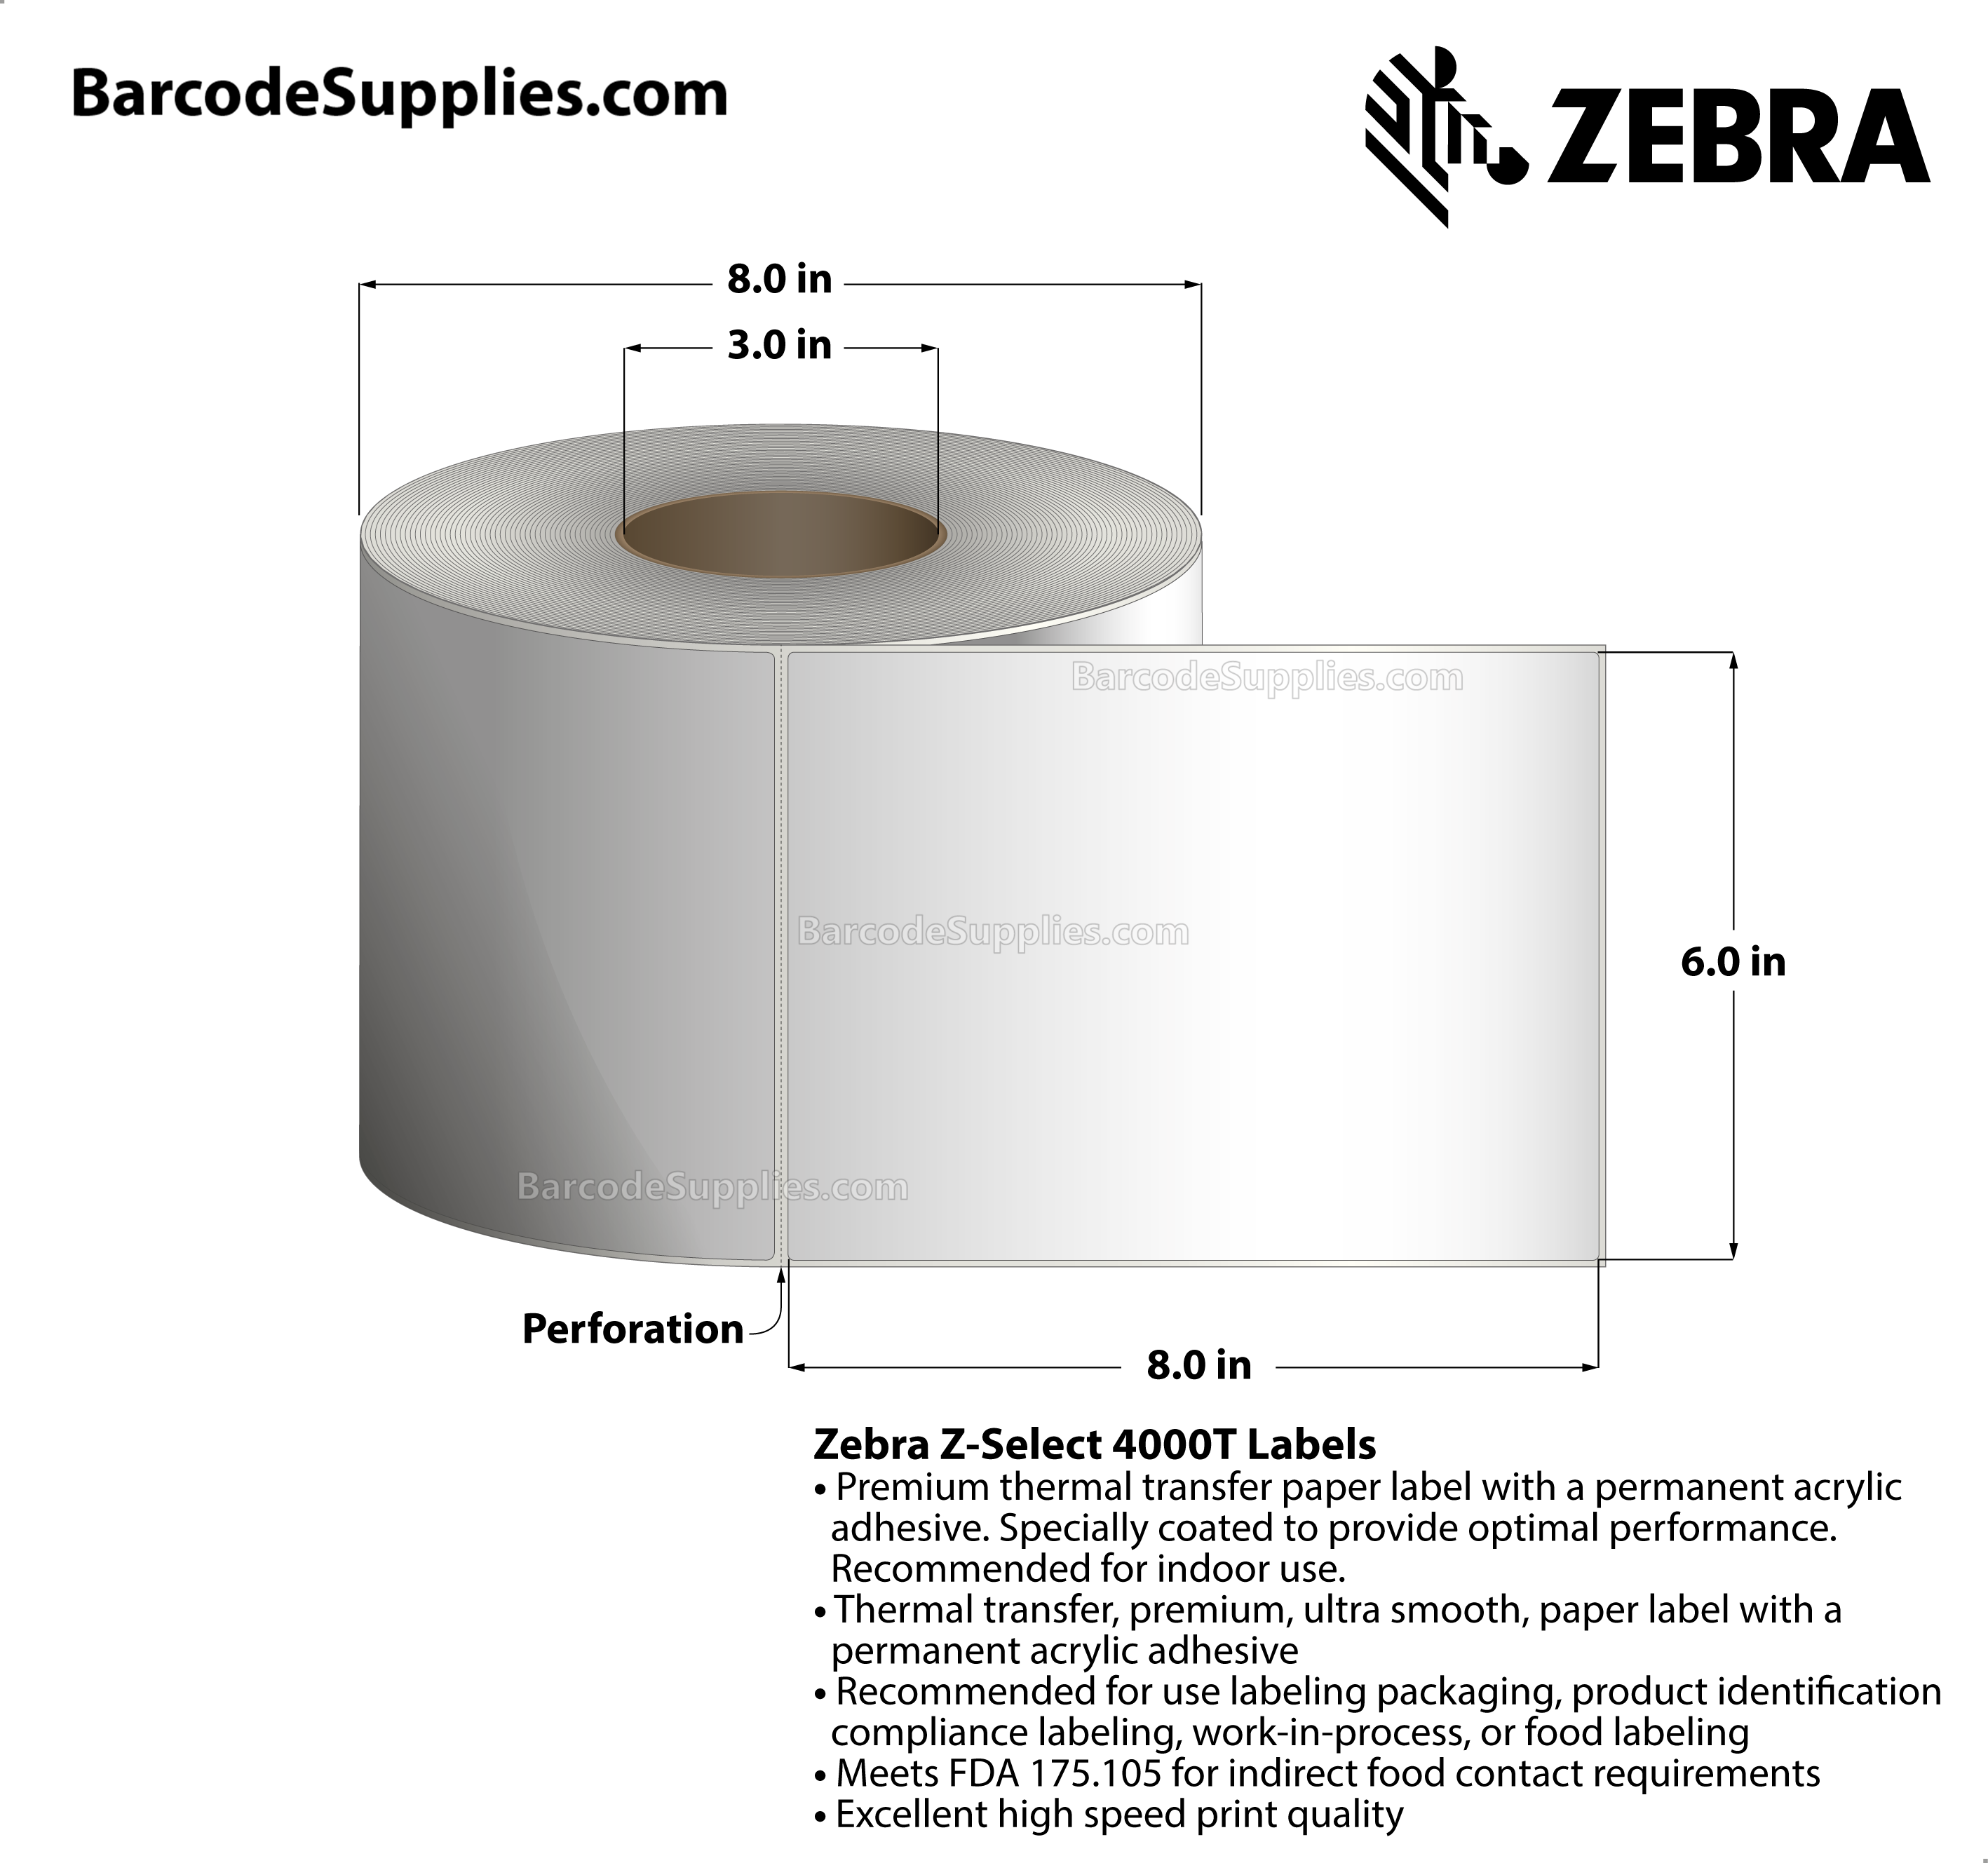 6 x 8 Thermal Transfer White Z-Select 4000T Labels With Permanent Adhesive - Perforated - 690 Labels Per Roll - Carton Of 2 Rolls - 1380 Labels Total - MPN: 94683